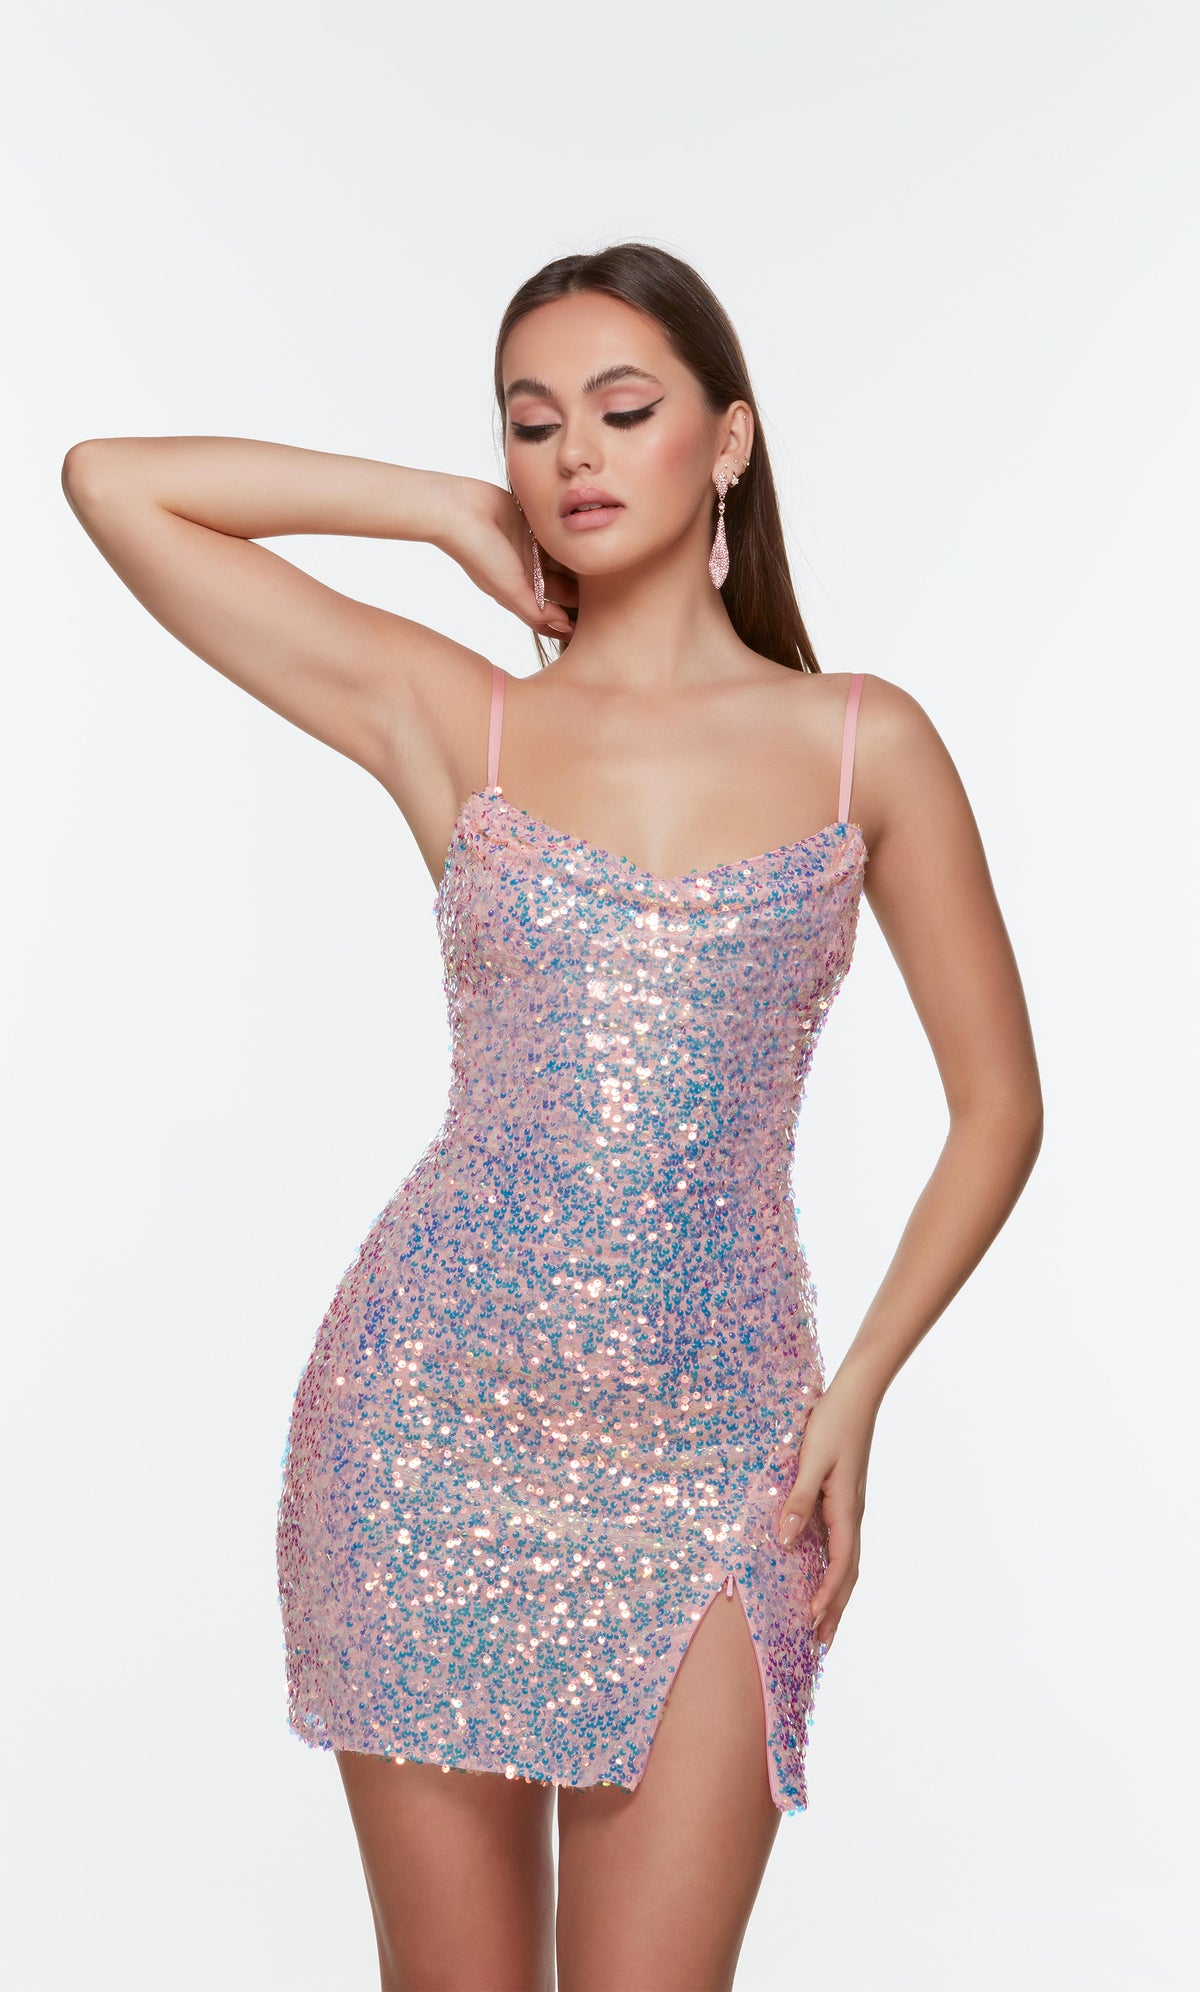 Short iridescent sequin homecoming dress with a cowl neckline and adjustable side slit.